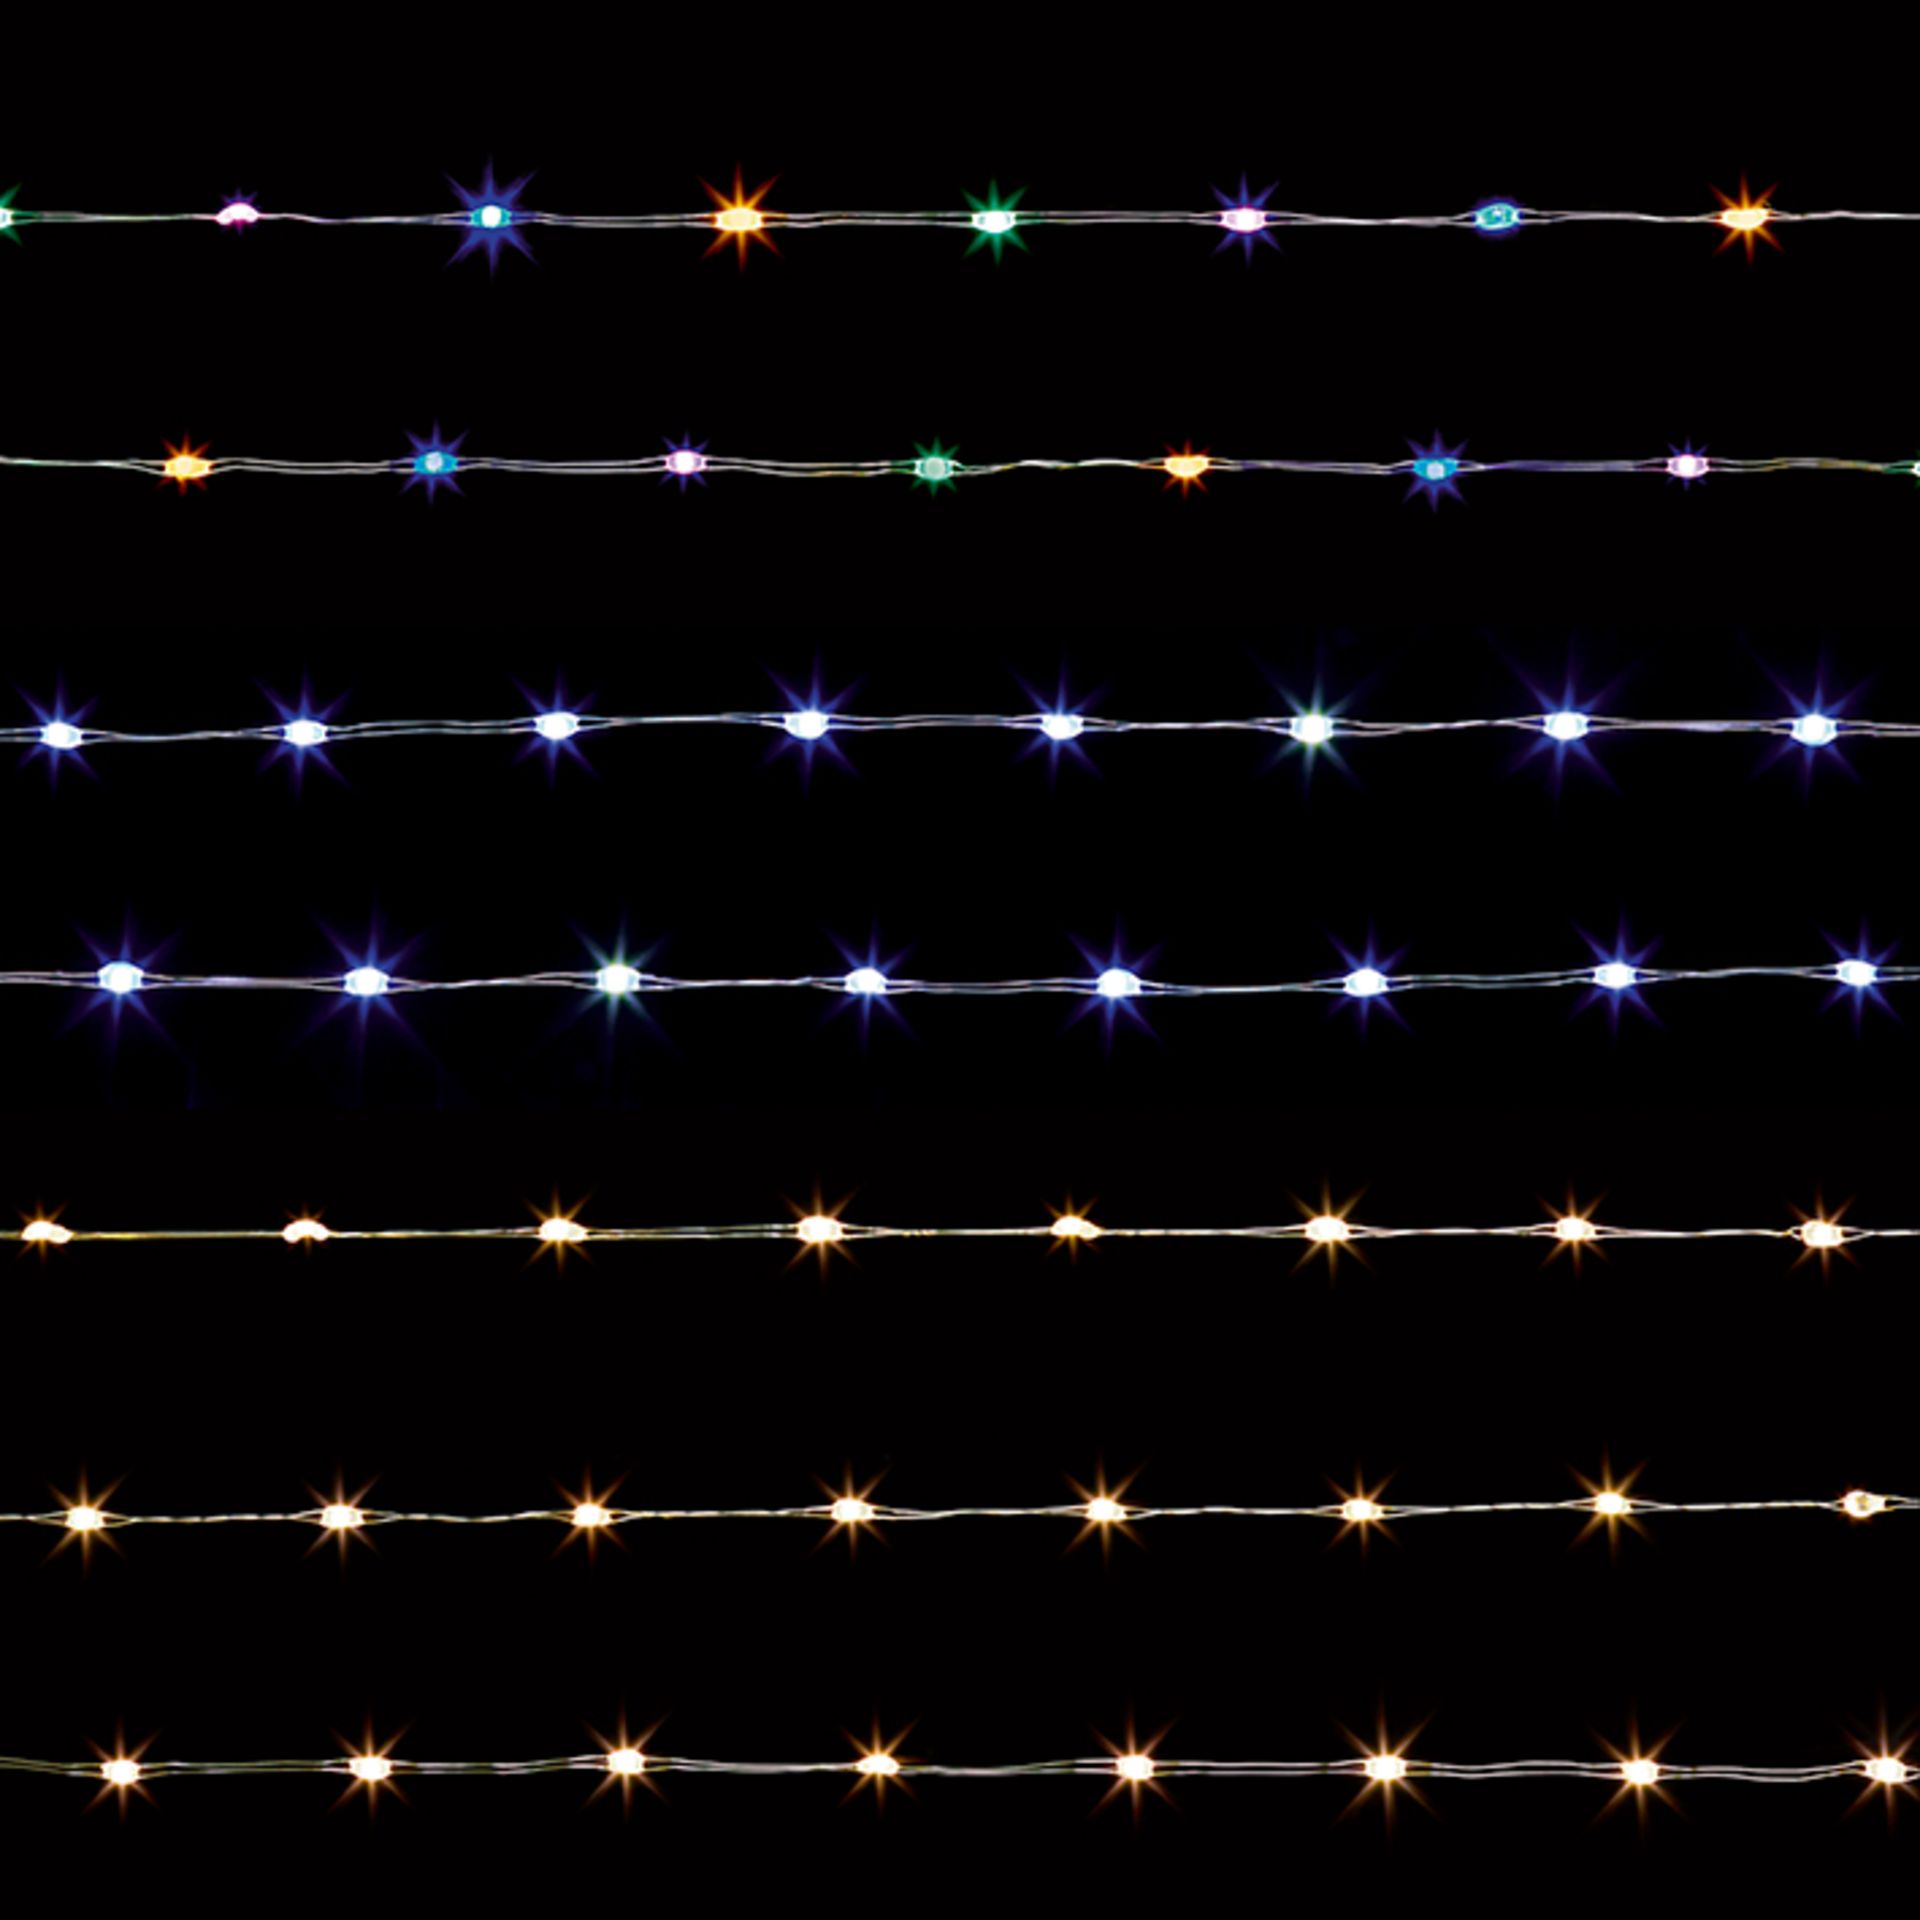 216 PCS PREMIER BATTERY OPERATED ULTRABRIGHTS LED LIGHTS - Image 2 of 2